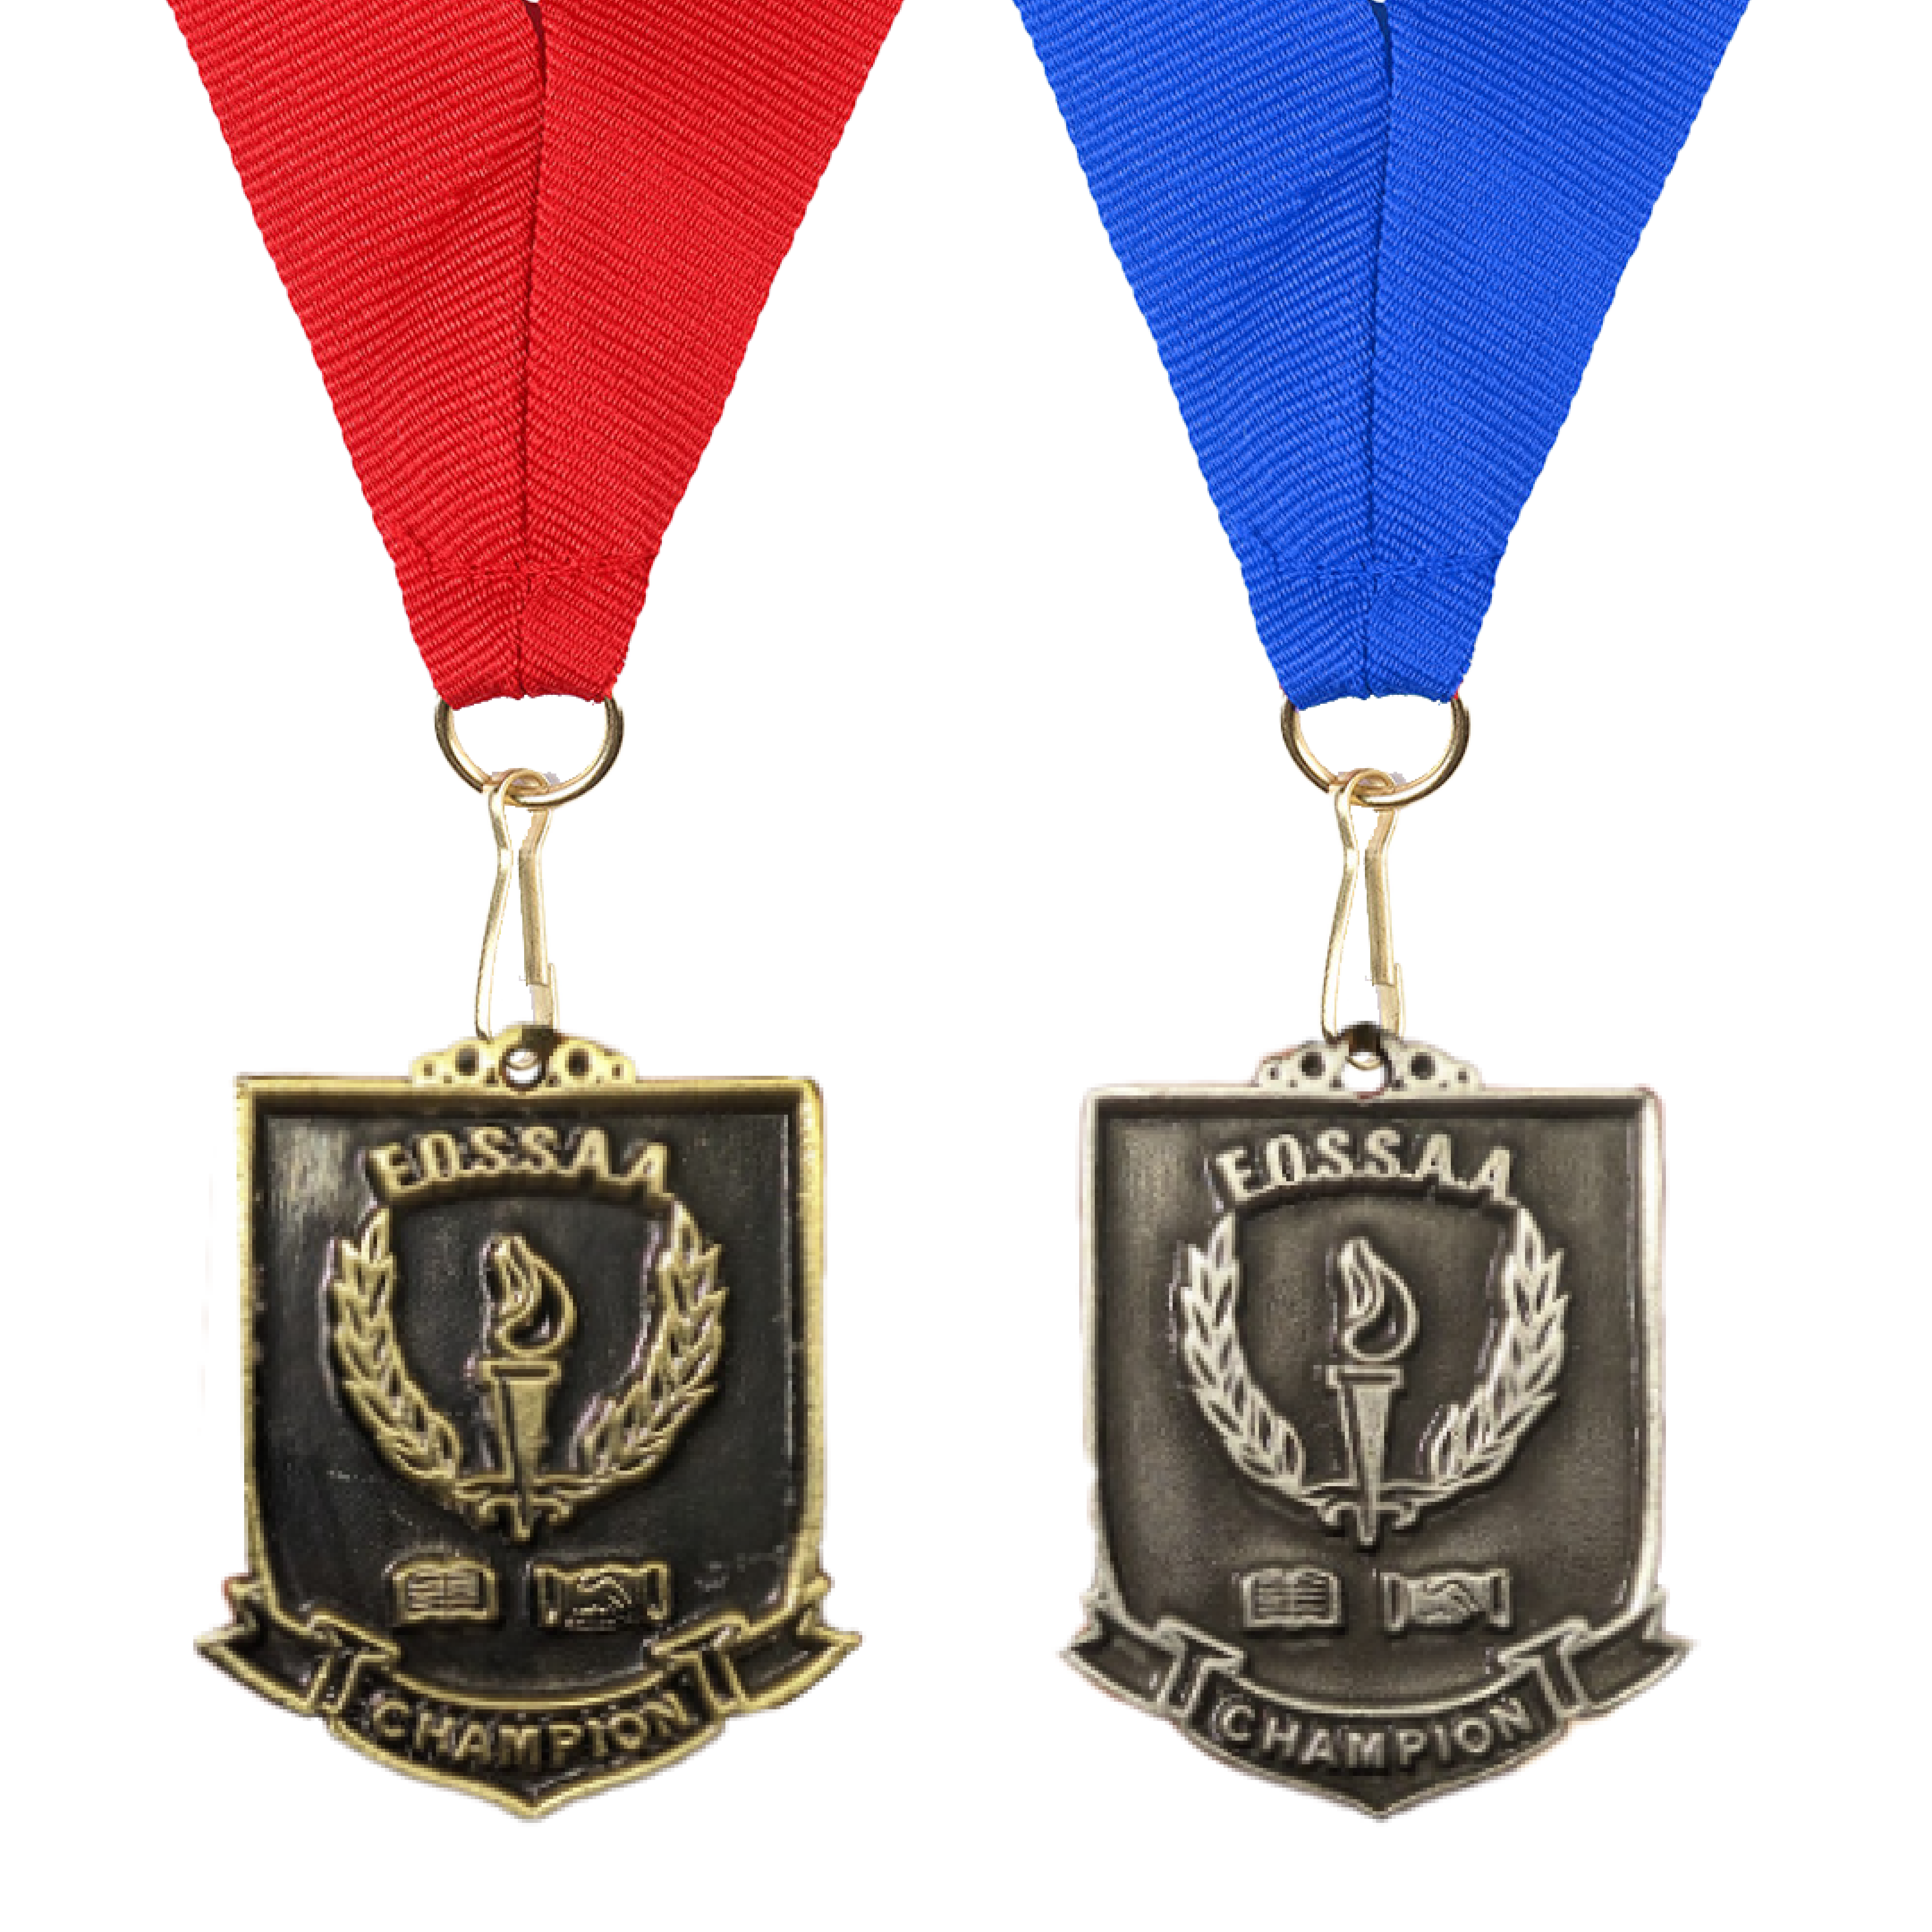 EOSSAA - Customized Medals with Neck Ribbons